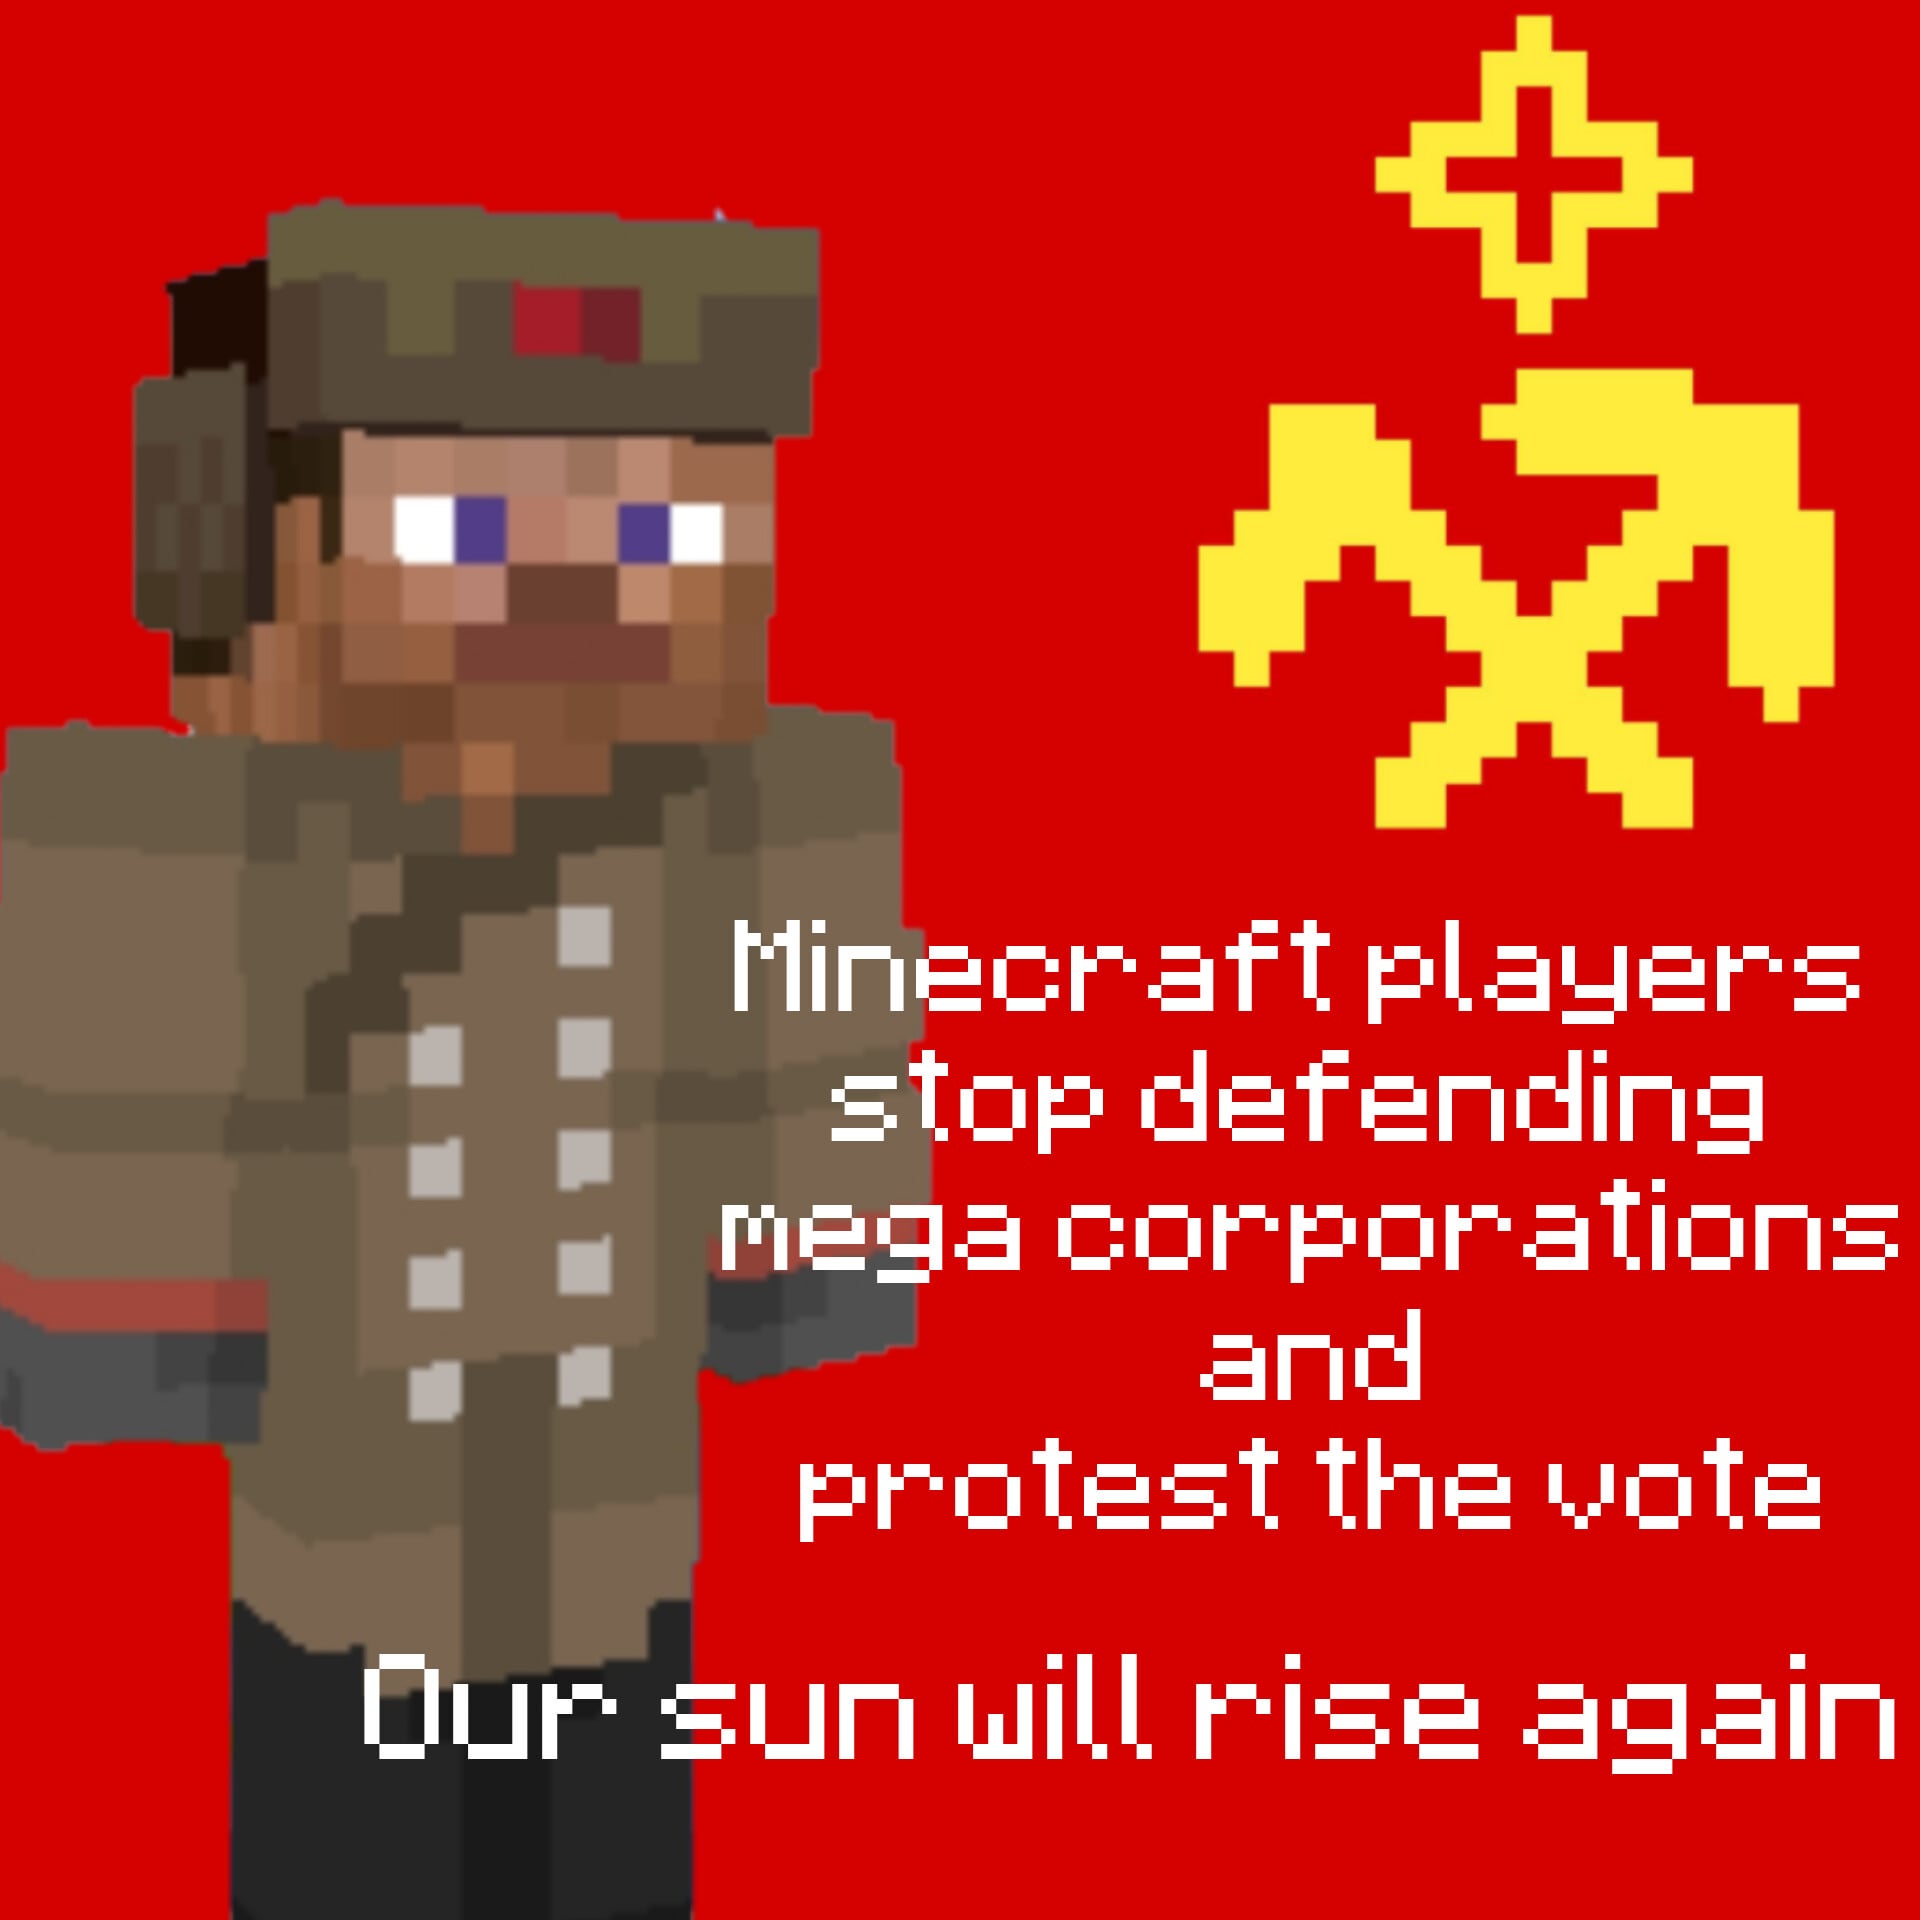 Minecraft Memes - Freedom for the most repressed grouper in history: Minecraft players